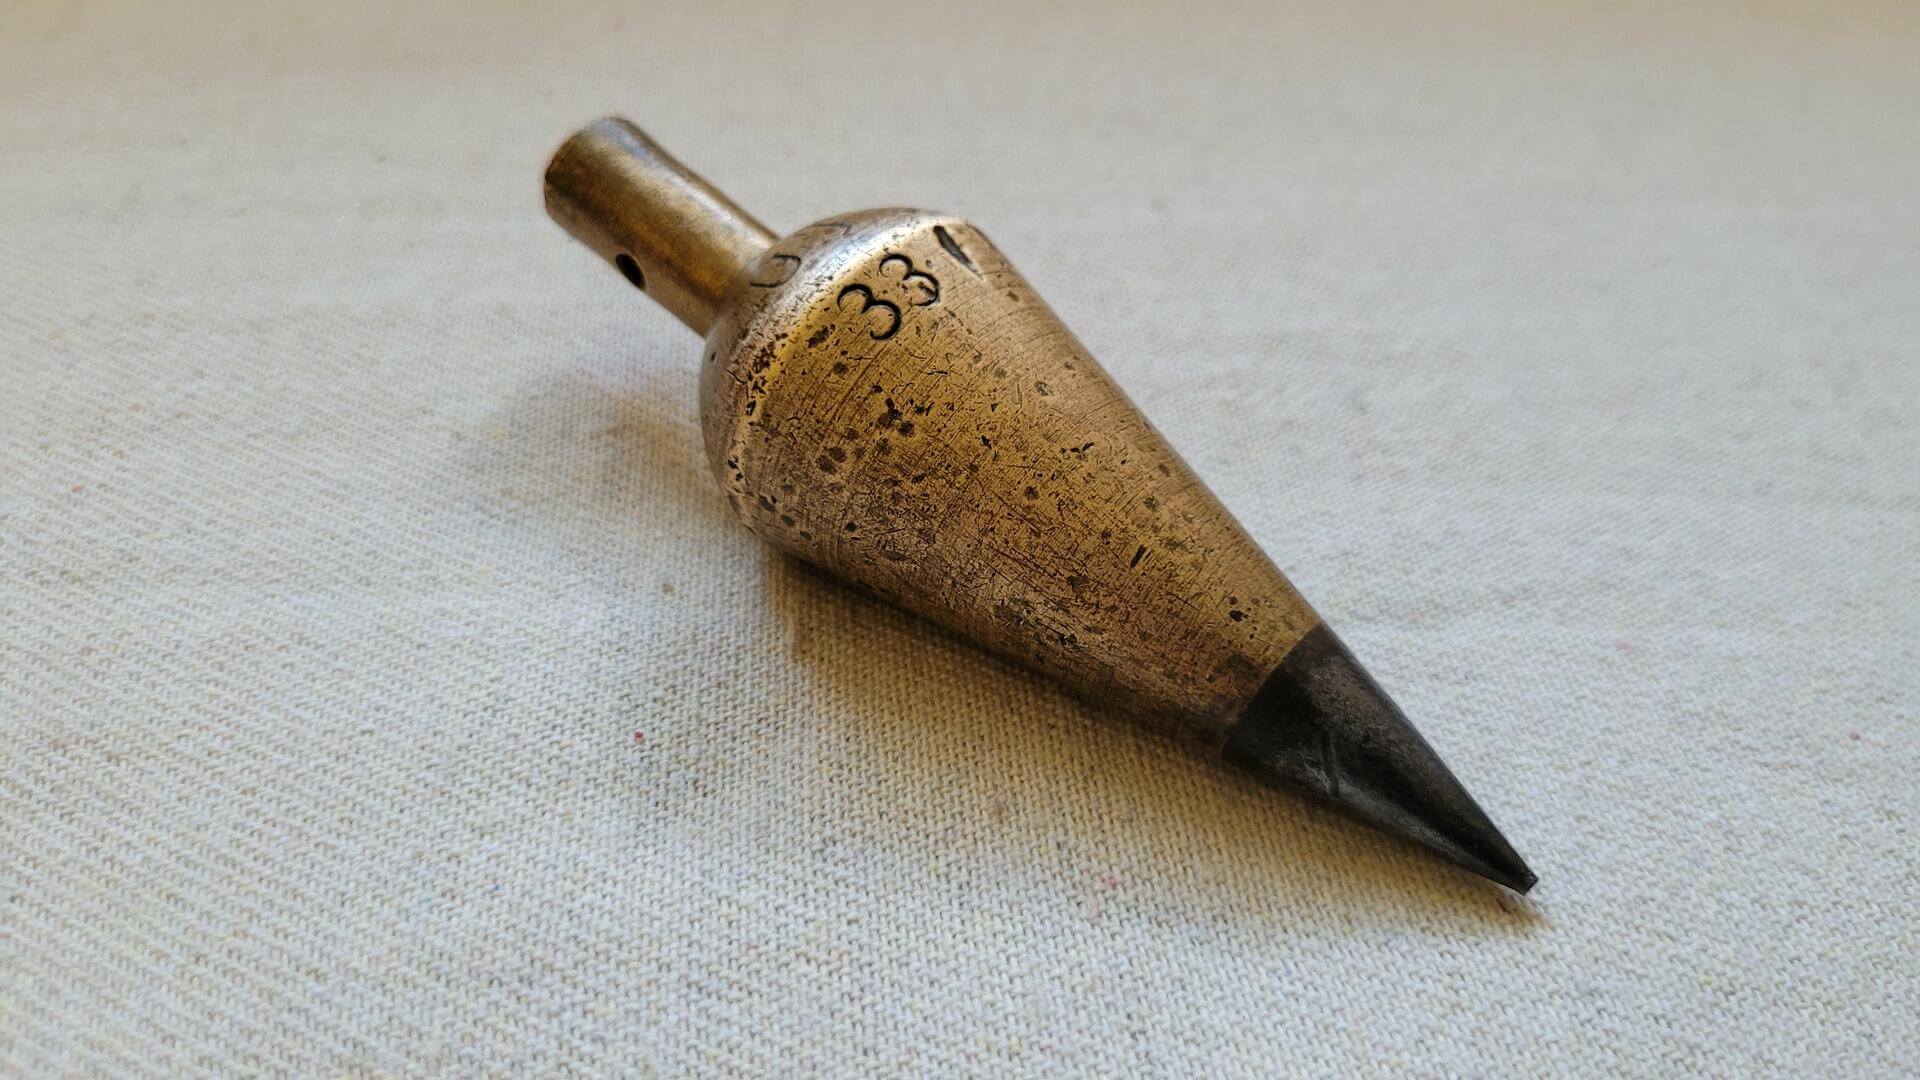 Vintage Solid Brass Carrot Plumb Bob with Steel Tip Level - Antique carpenter and stone mason marking and measuring collectible tools